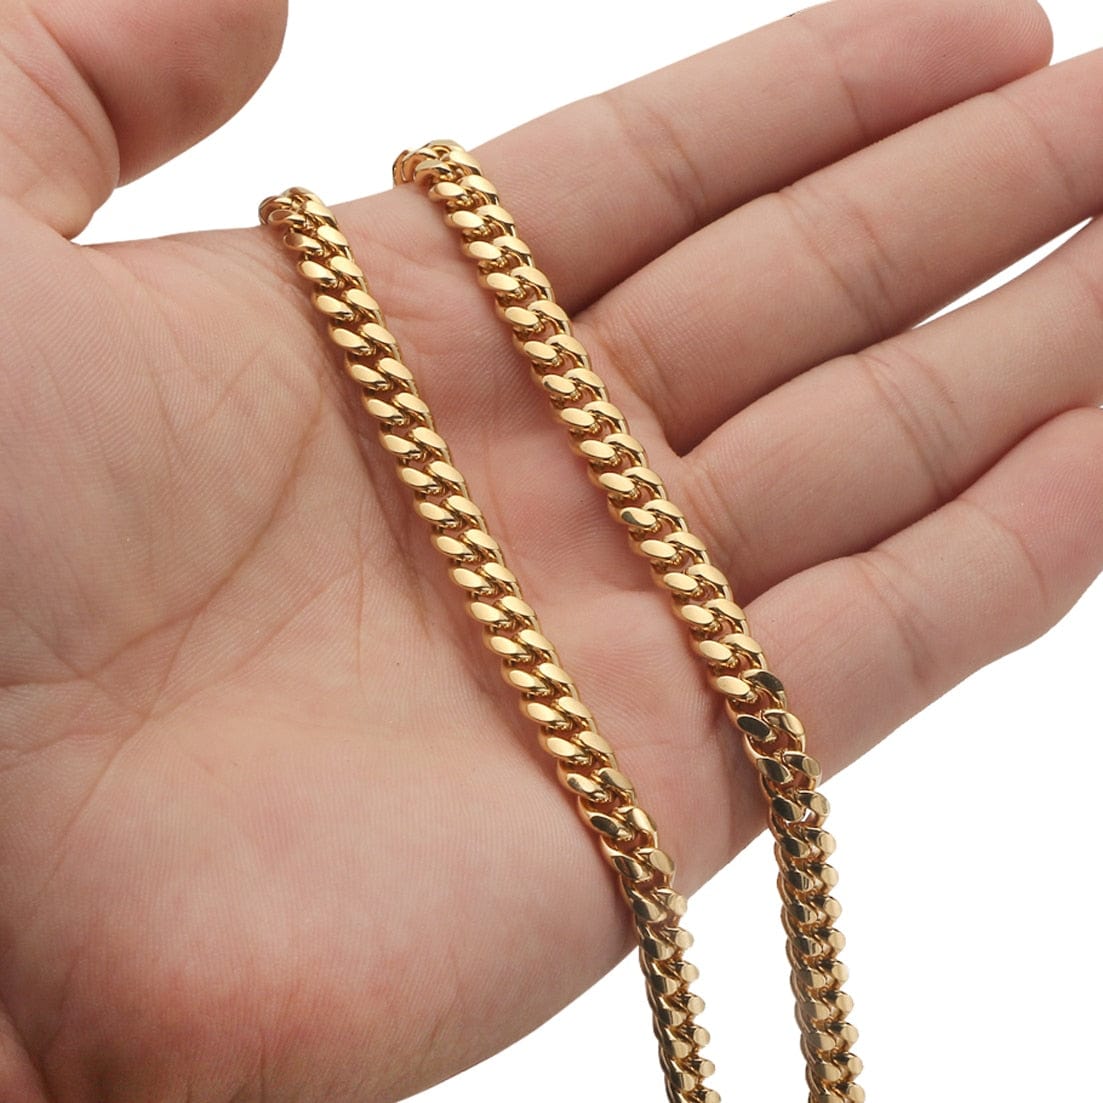 Gold Miami Cuban Link Chain Necklace For Men Or Unisex - 6mm/8mm/10mm/12mm/14mm